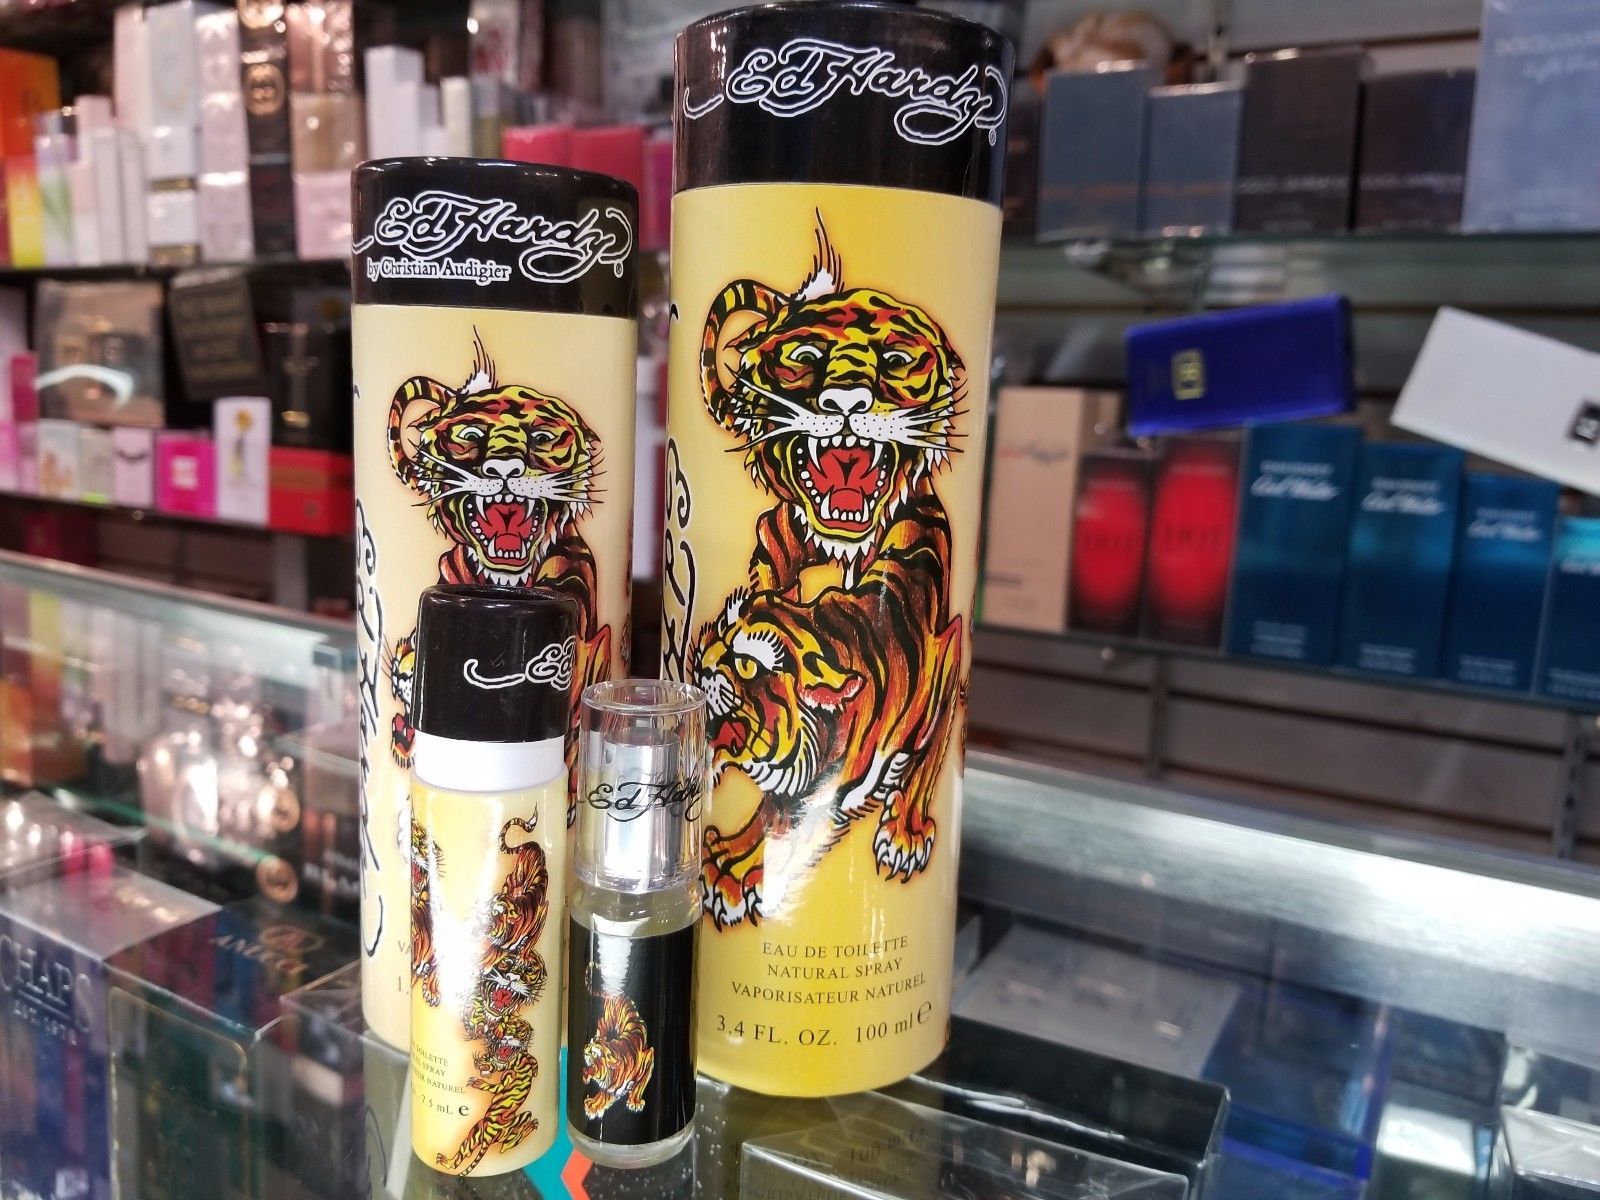 ED HARDY by Christian Audigier .25 1.7 3.4 oz for Men Cologne BRAND NEW IN CAN - $30.24 - $64.12